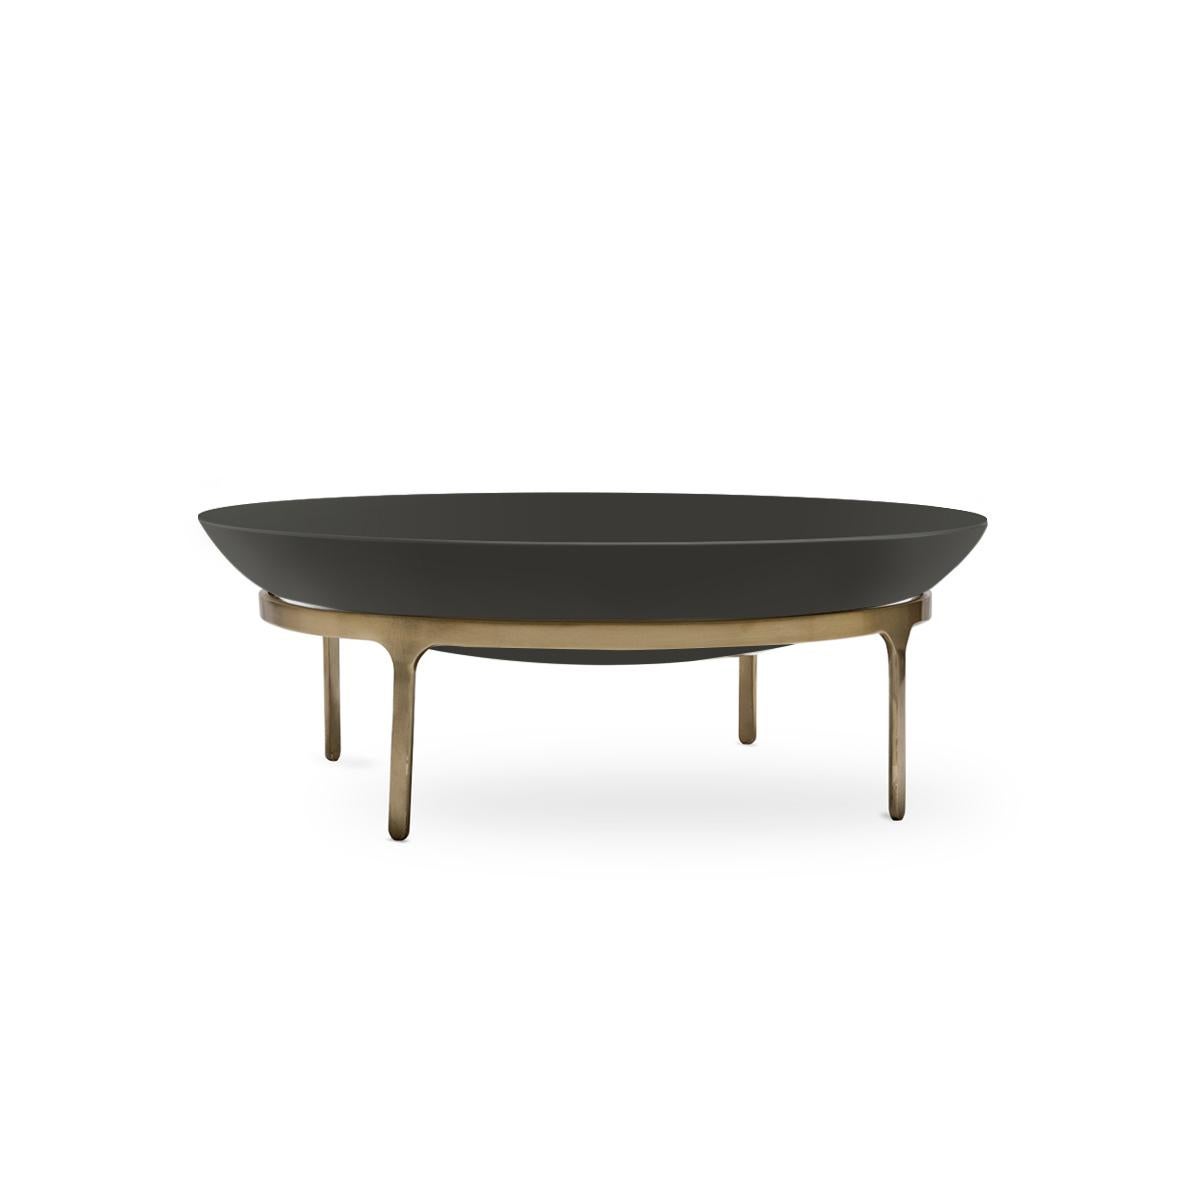 Tiberius I is a large ceramic fruit bowl with a brass stand, available in two color versions: anthracite or white.
The product is part of the collection New Roman, by Jaime Hayon: inspired by the vessels of the Roman Empire, this collection